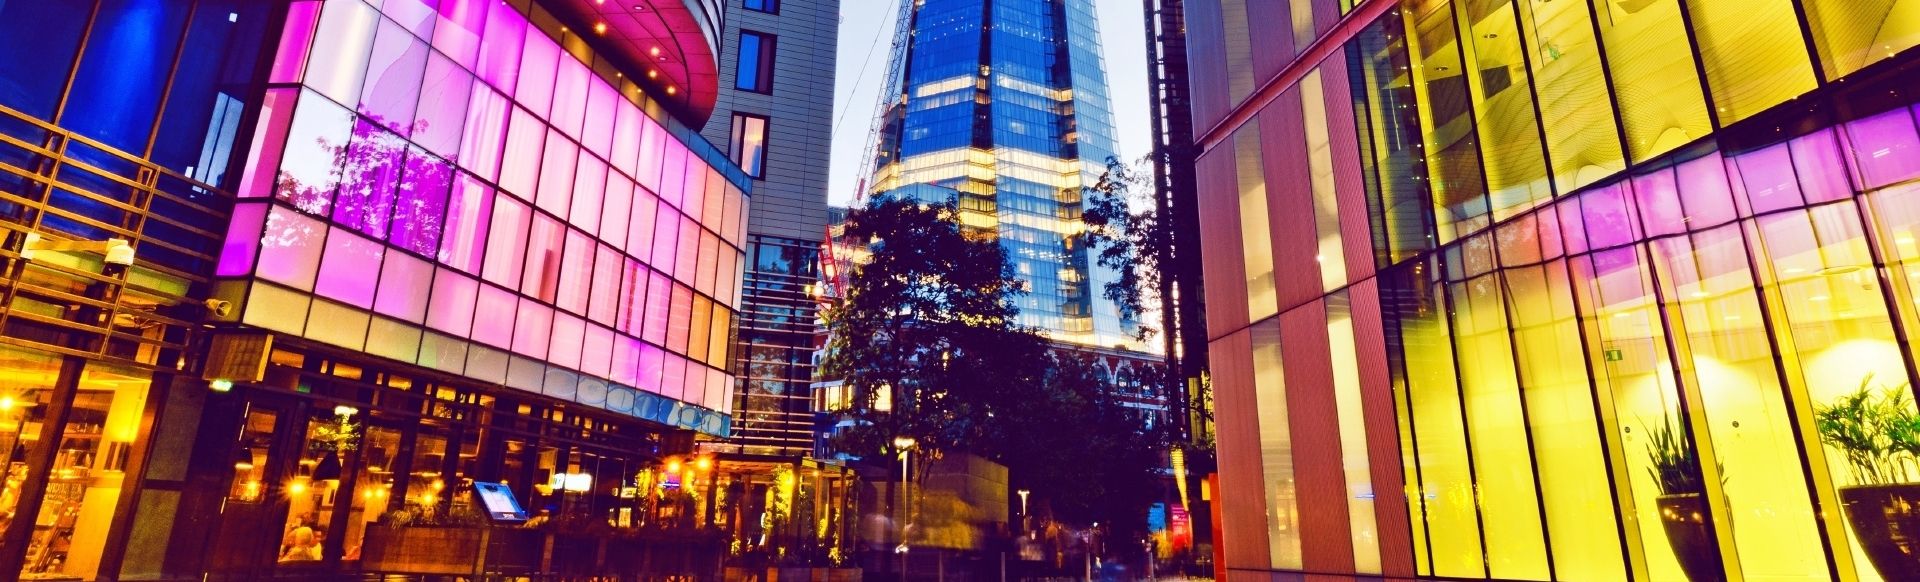 The Shard in the centre of a walkway. There are buildings with pink, blue and yellow glass panels on both sides of the path.